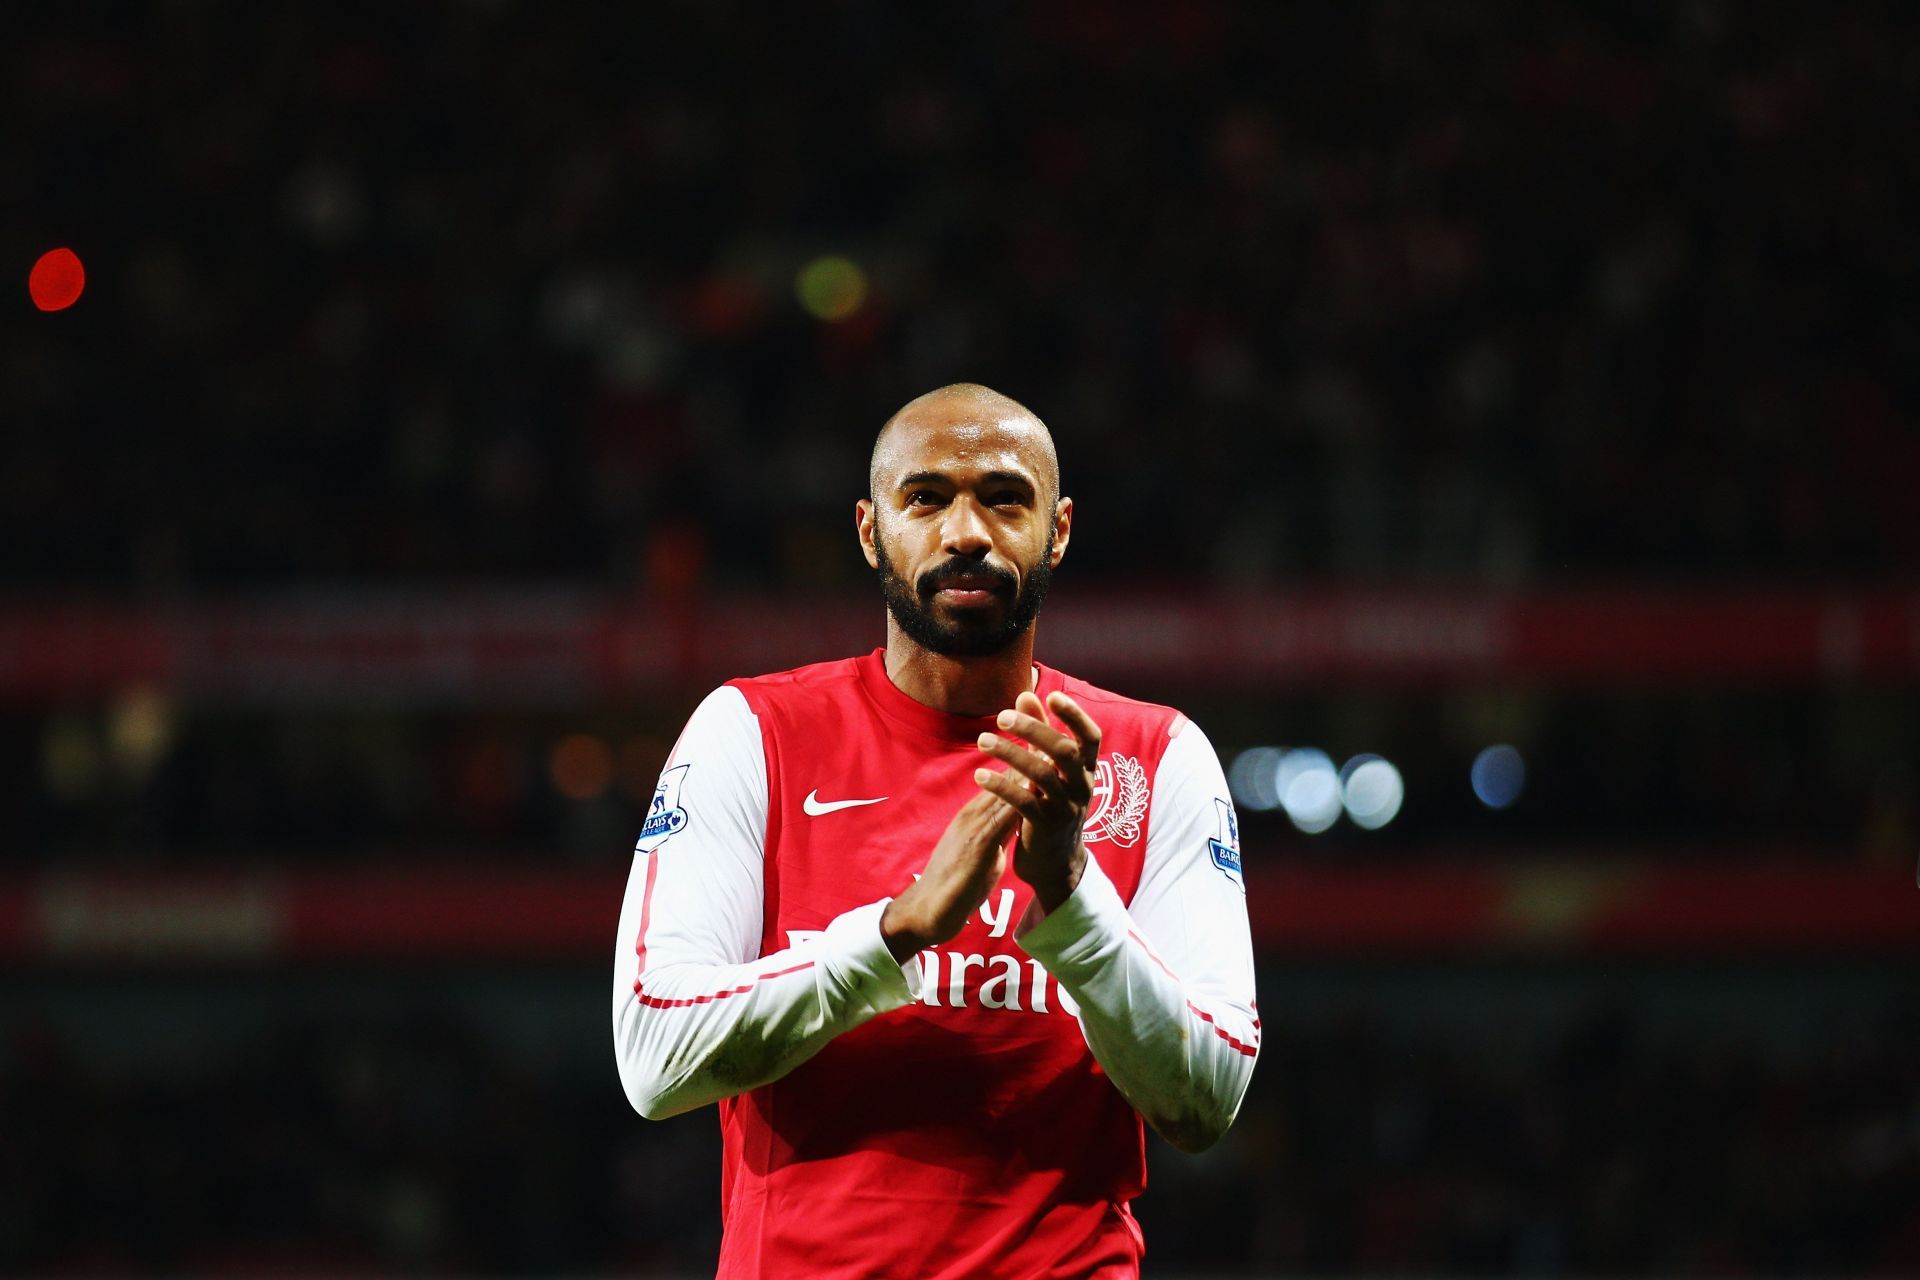 Thierry Henry, a man who made his name in the Premier League.